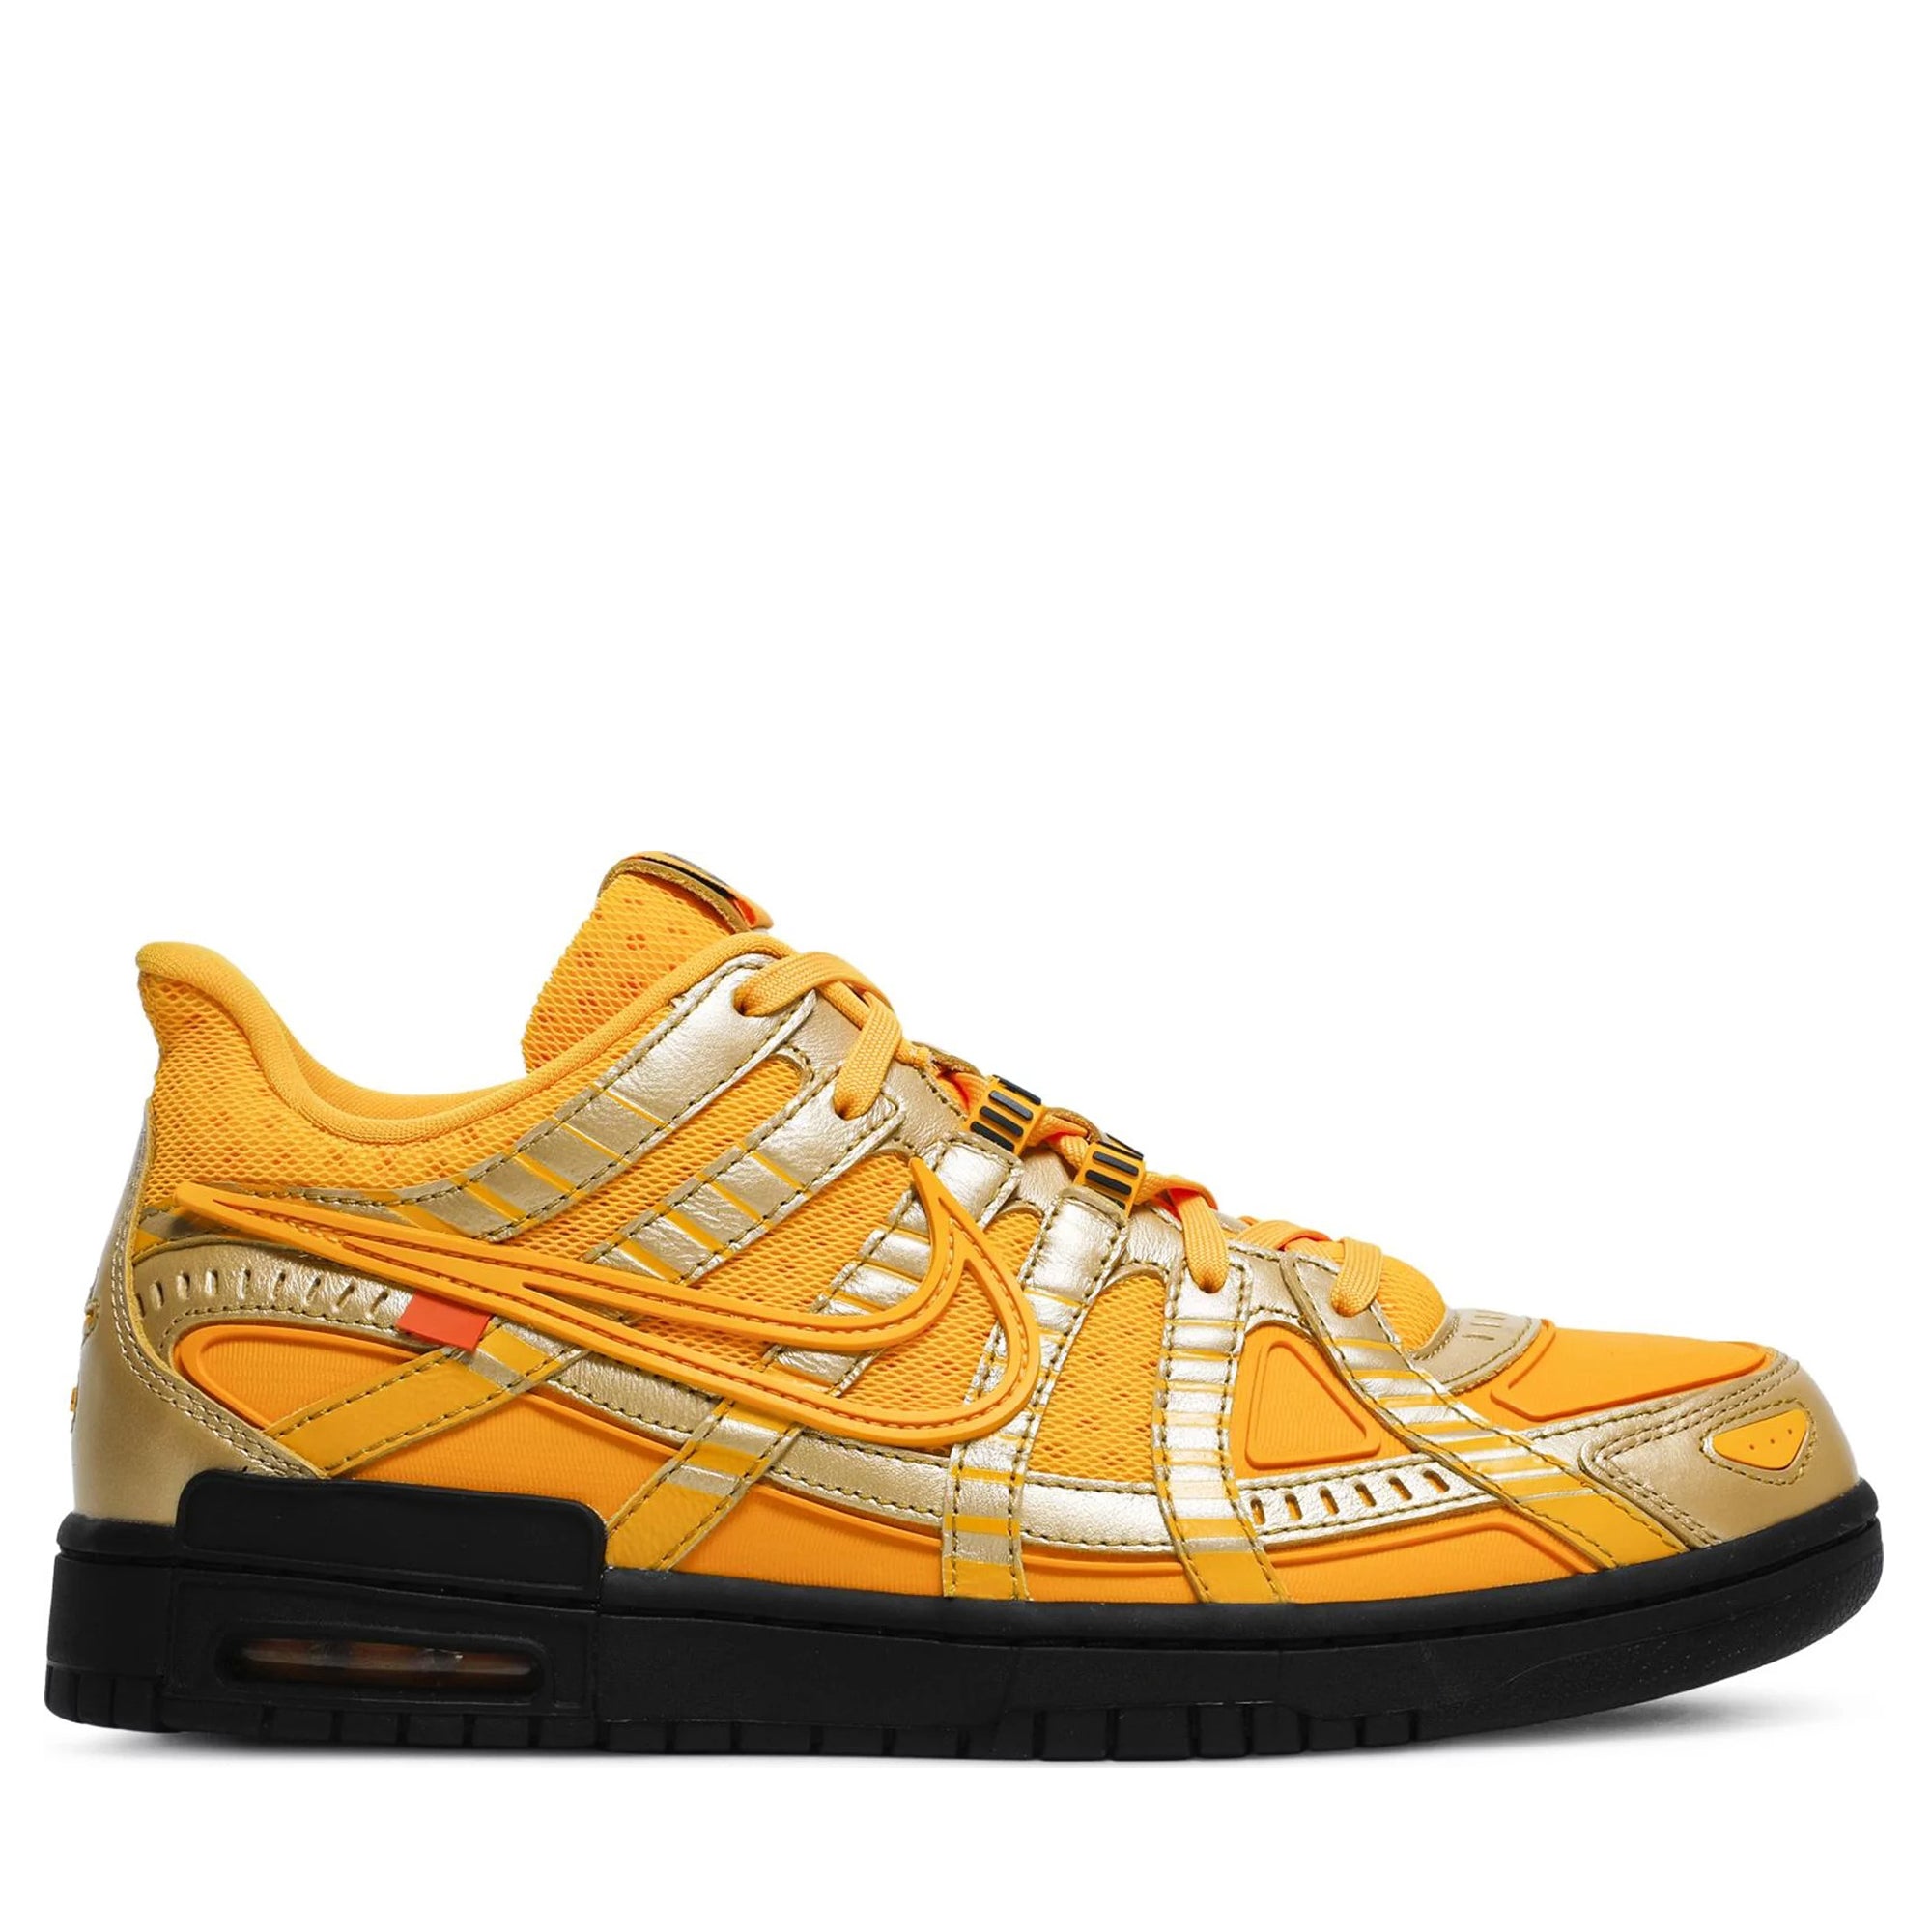 Nike Air Rubber Dunk Off-White University Gold-PLUS